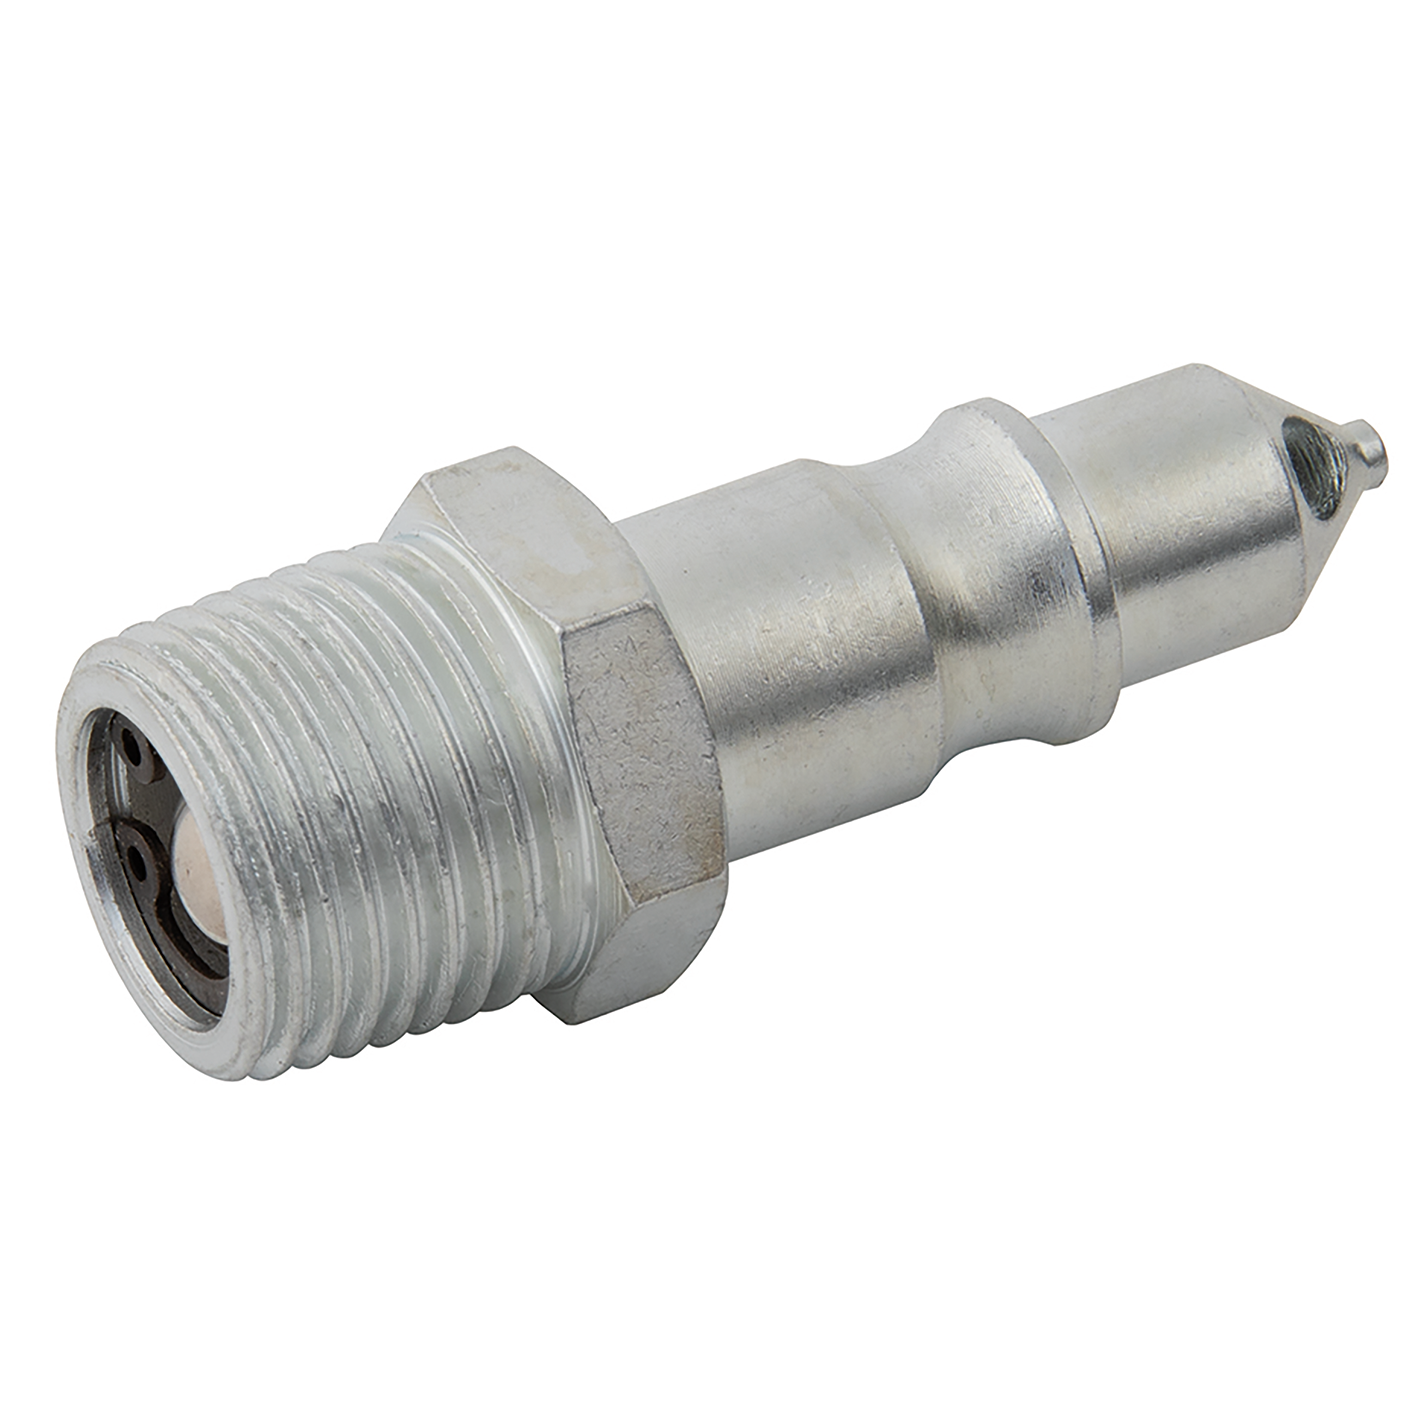 BE-100 ADAPTOR 1/2 BSPT MALE SAFETY